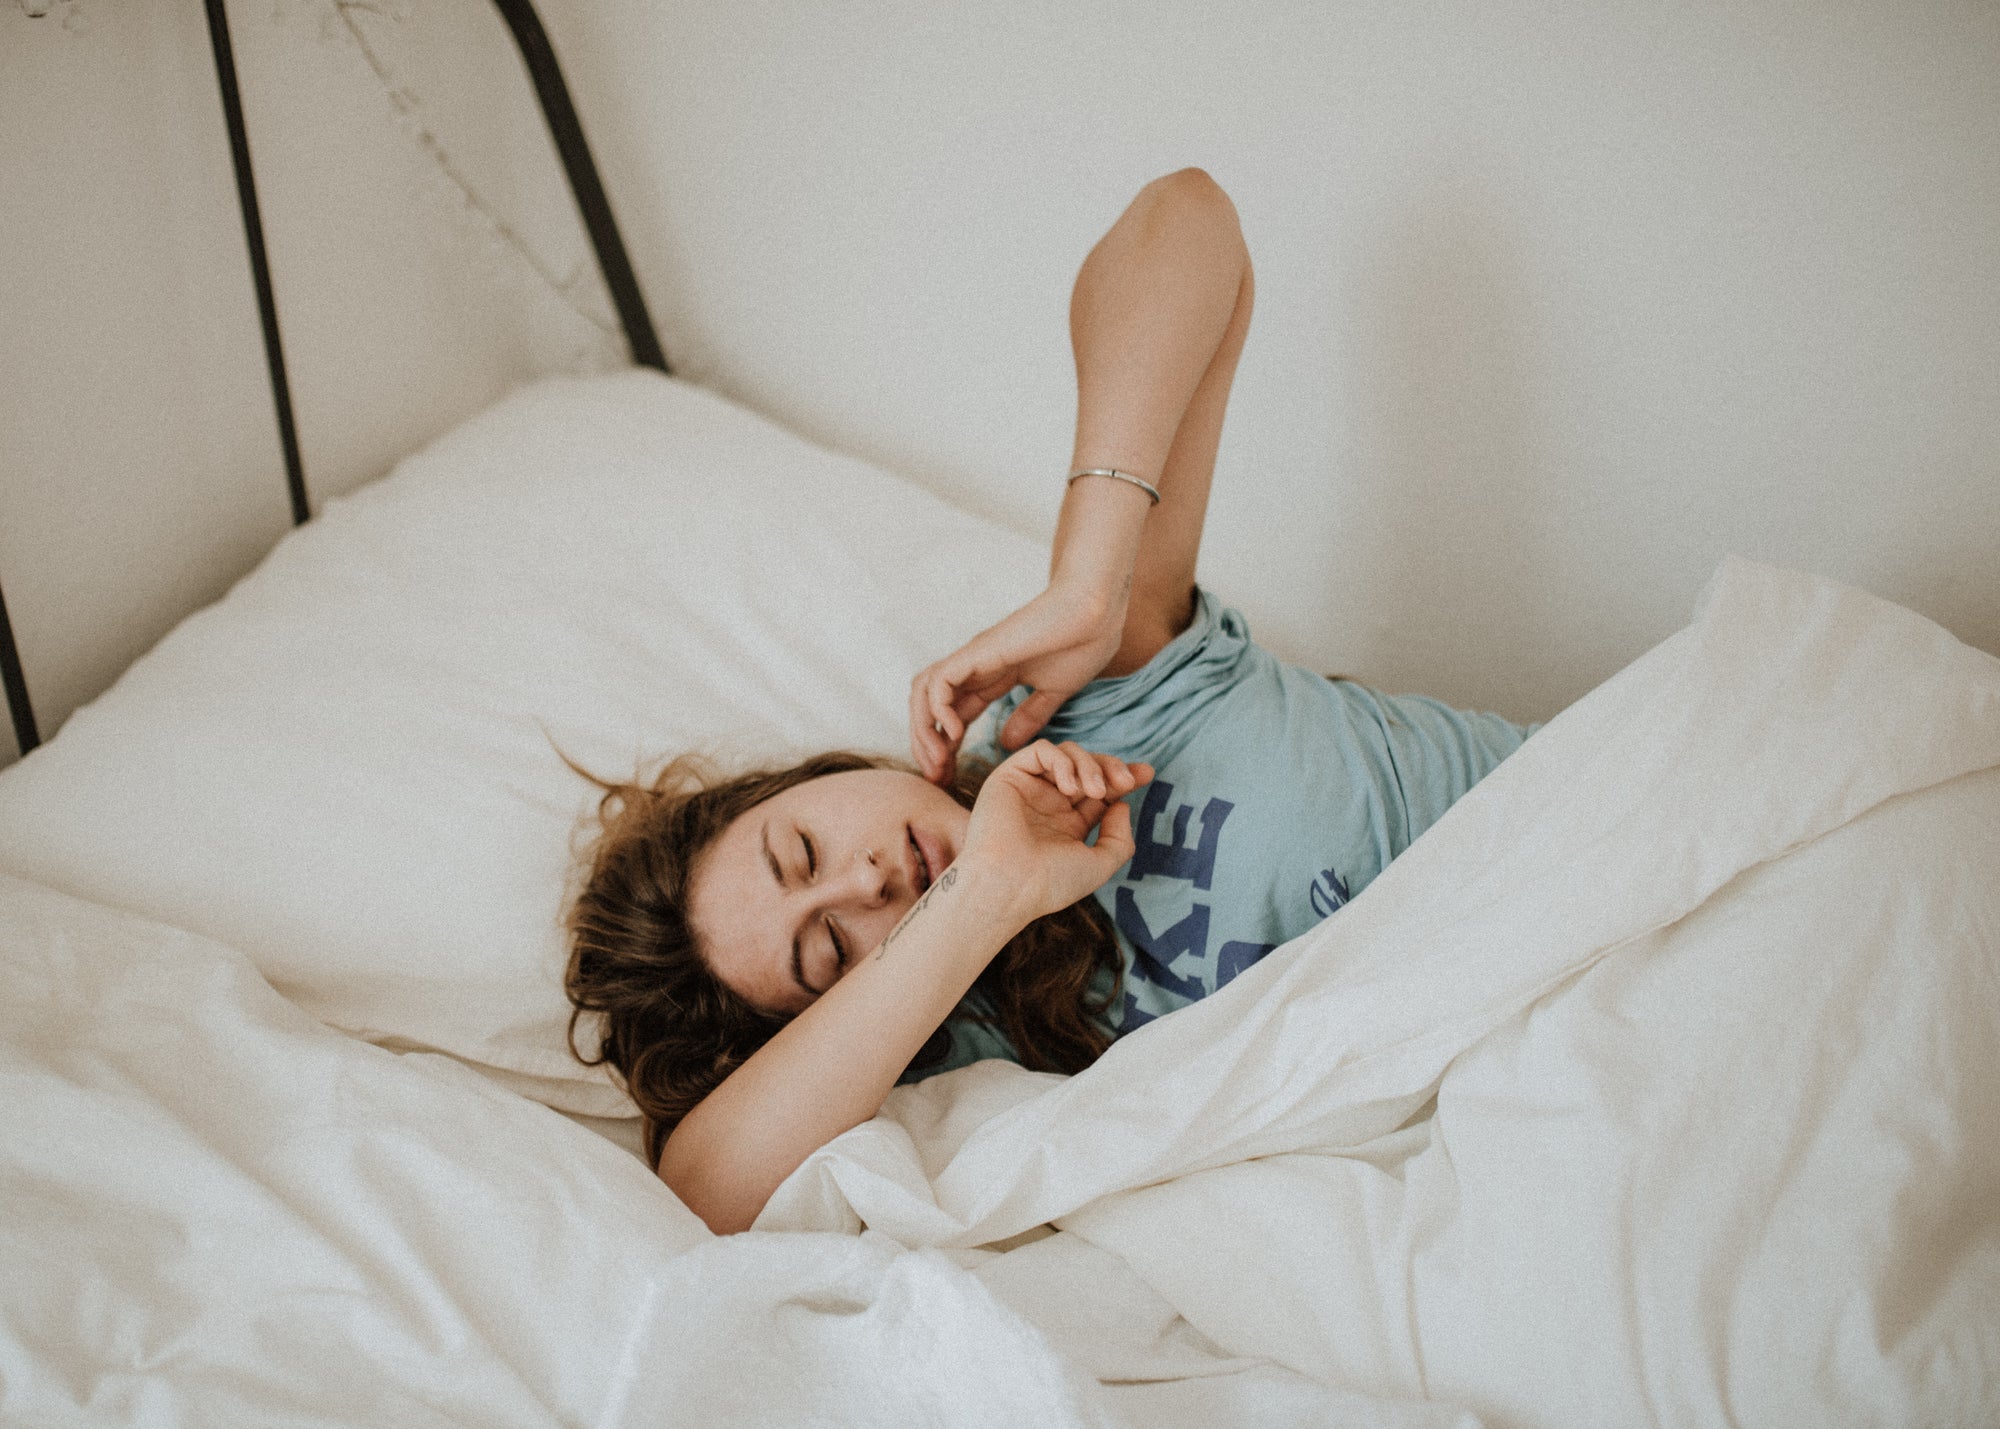 Melatonin as a sleeping aid: what you need to know